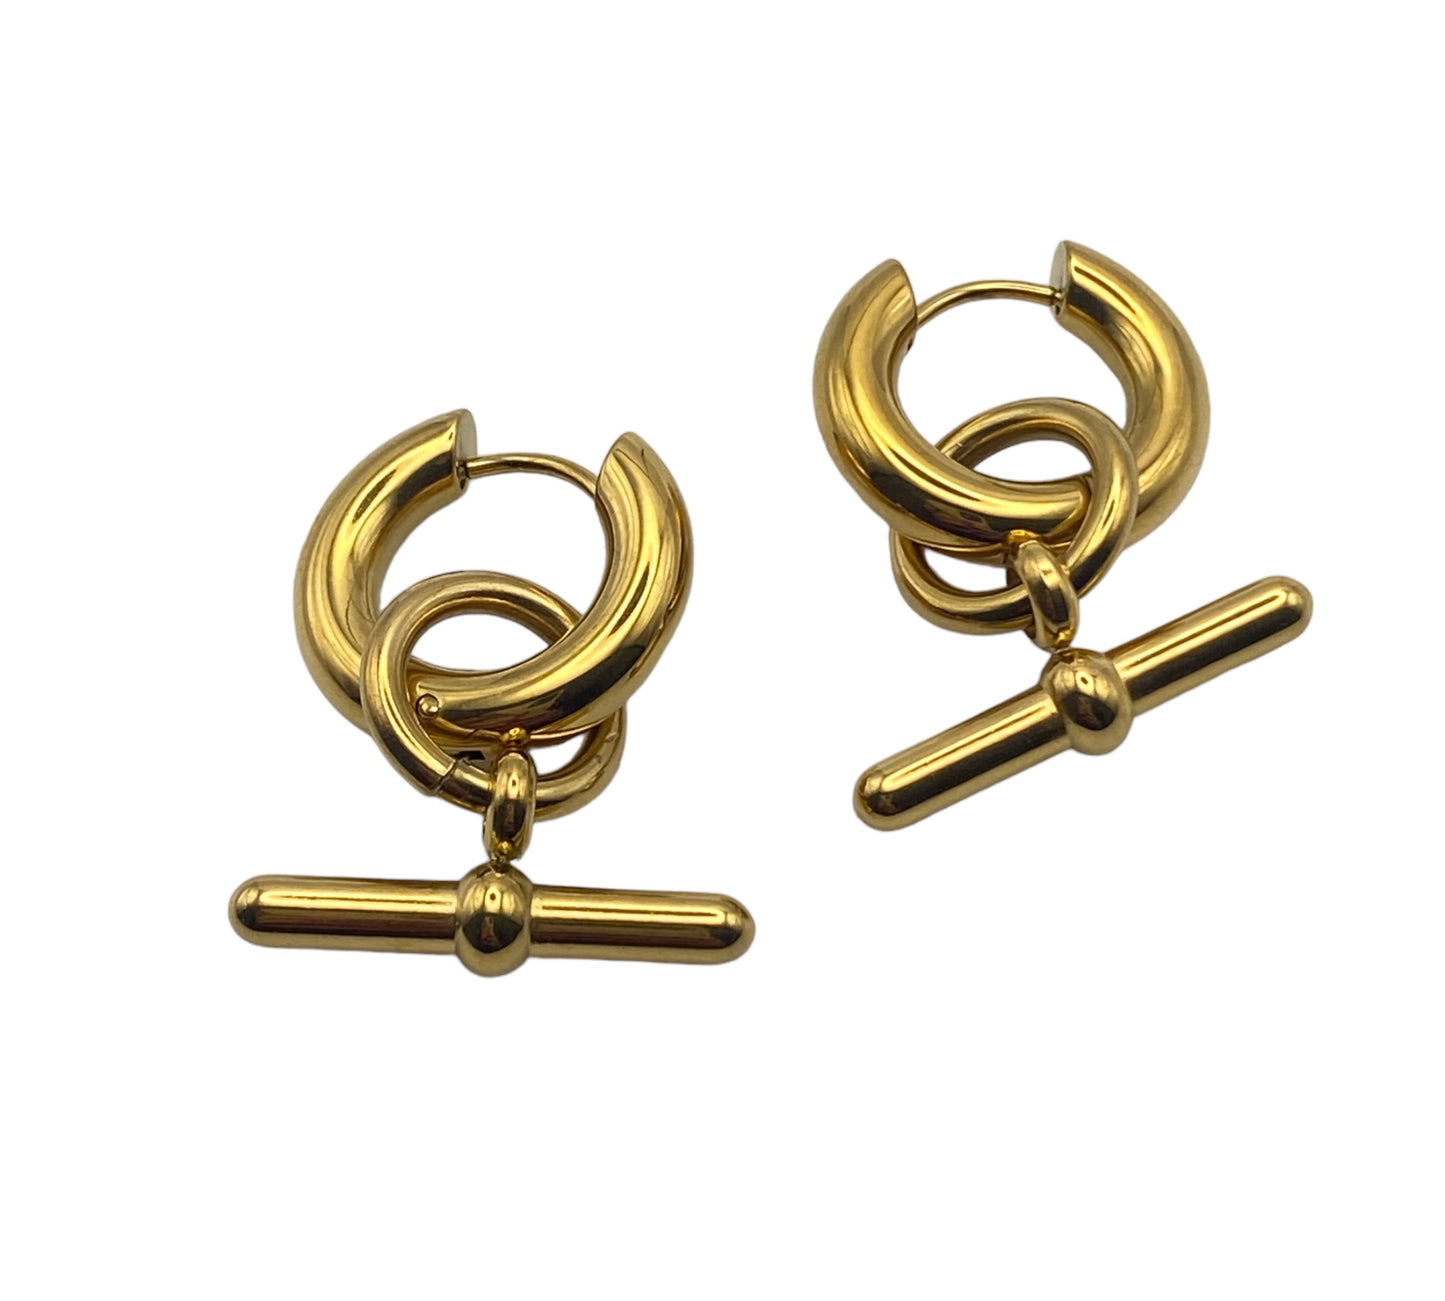 "SELENE" gold plated hoop earrings with a bar attached to a circle pendant